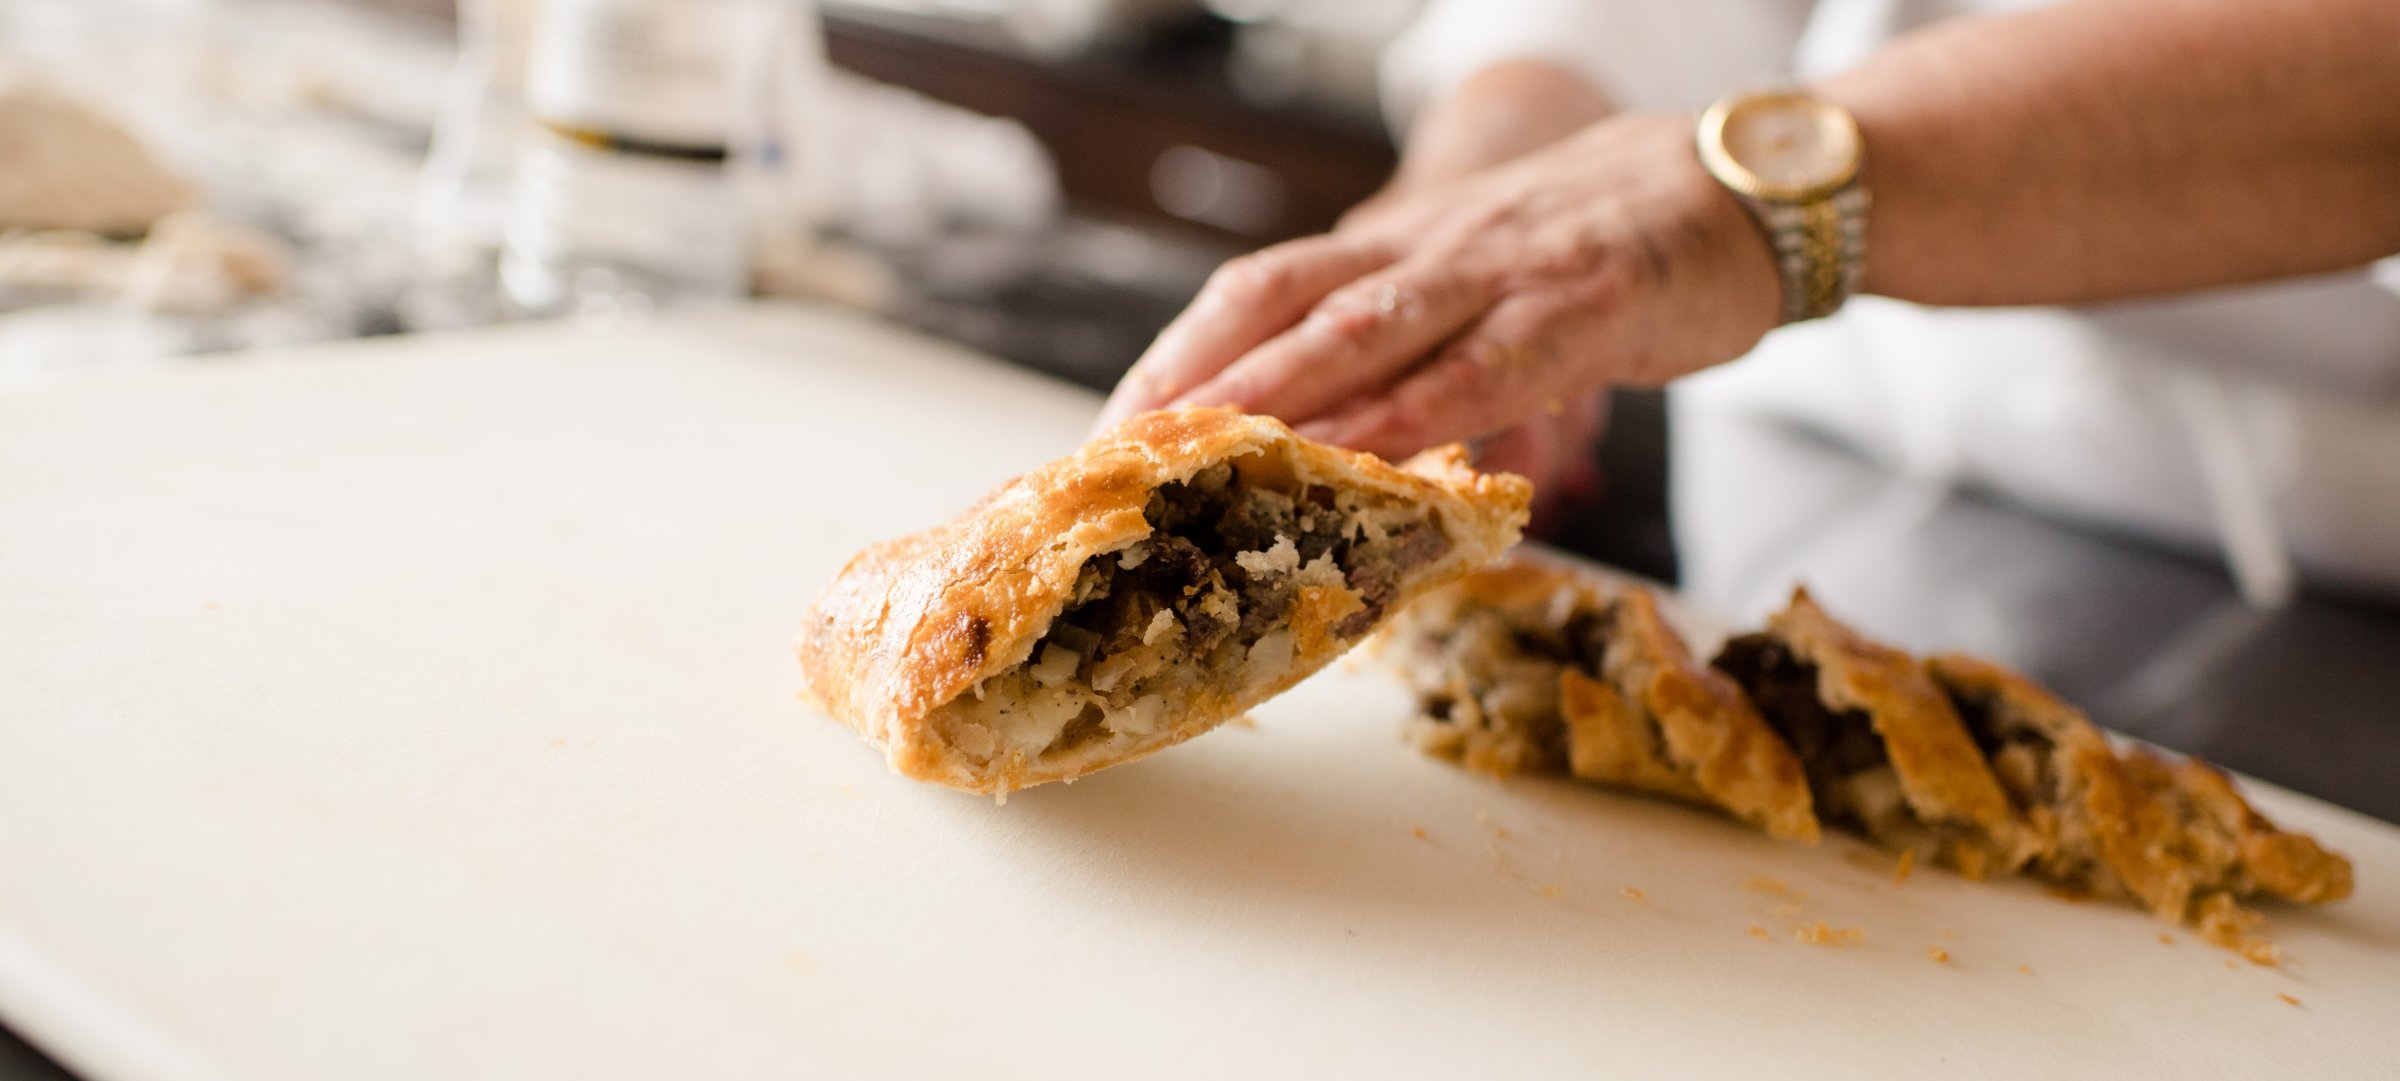 Chef showing the inside of a Cornish pasty